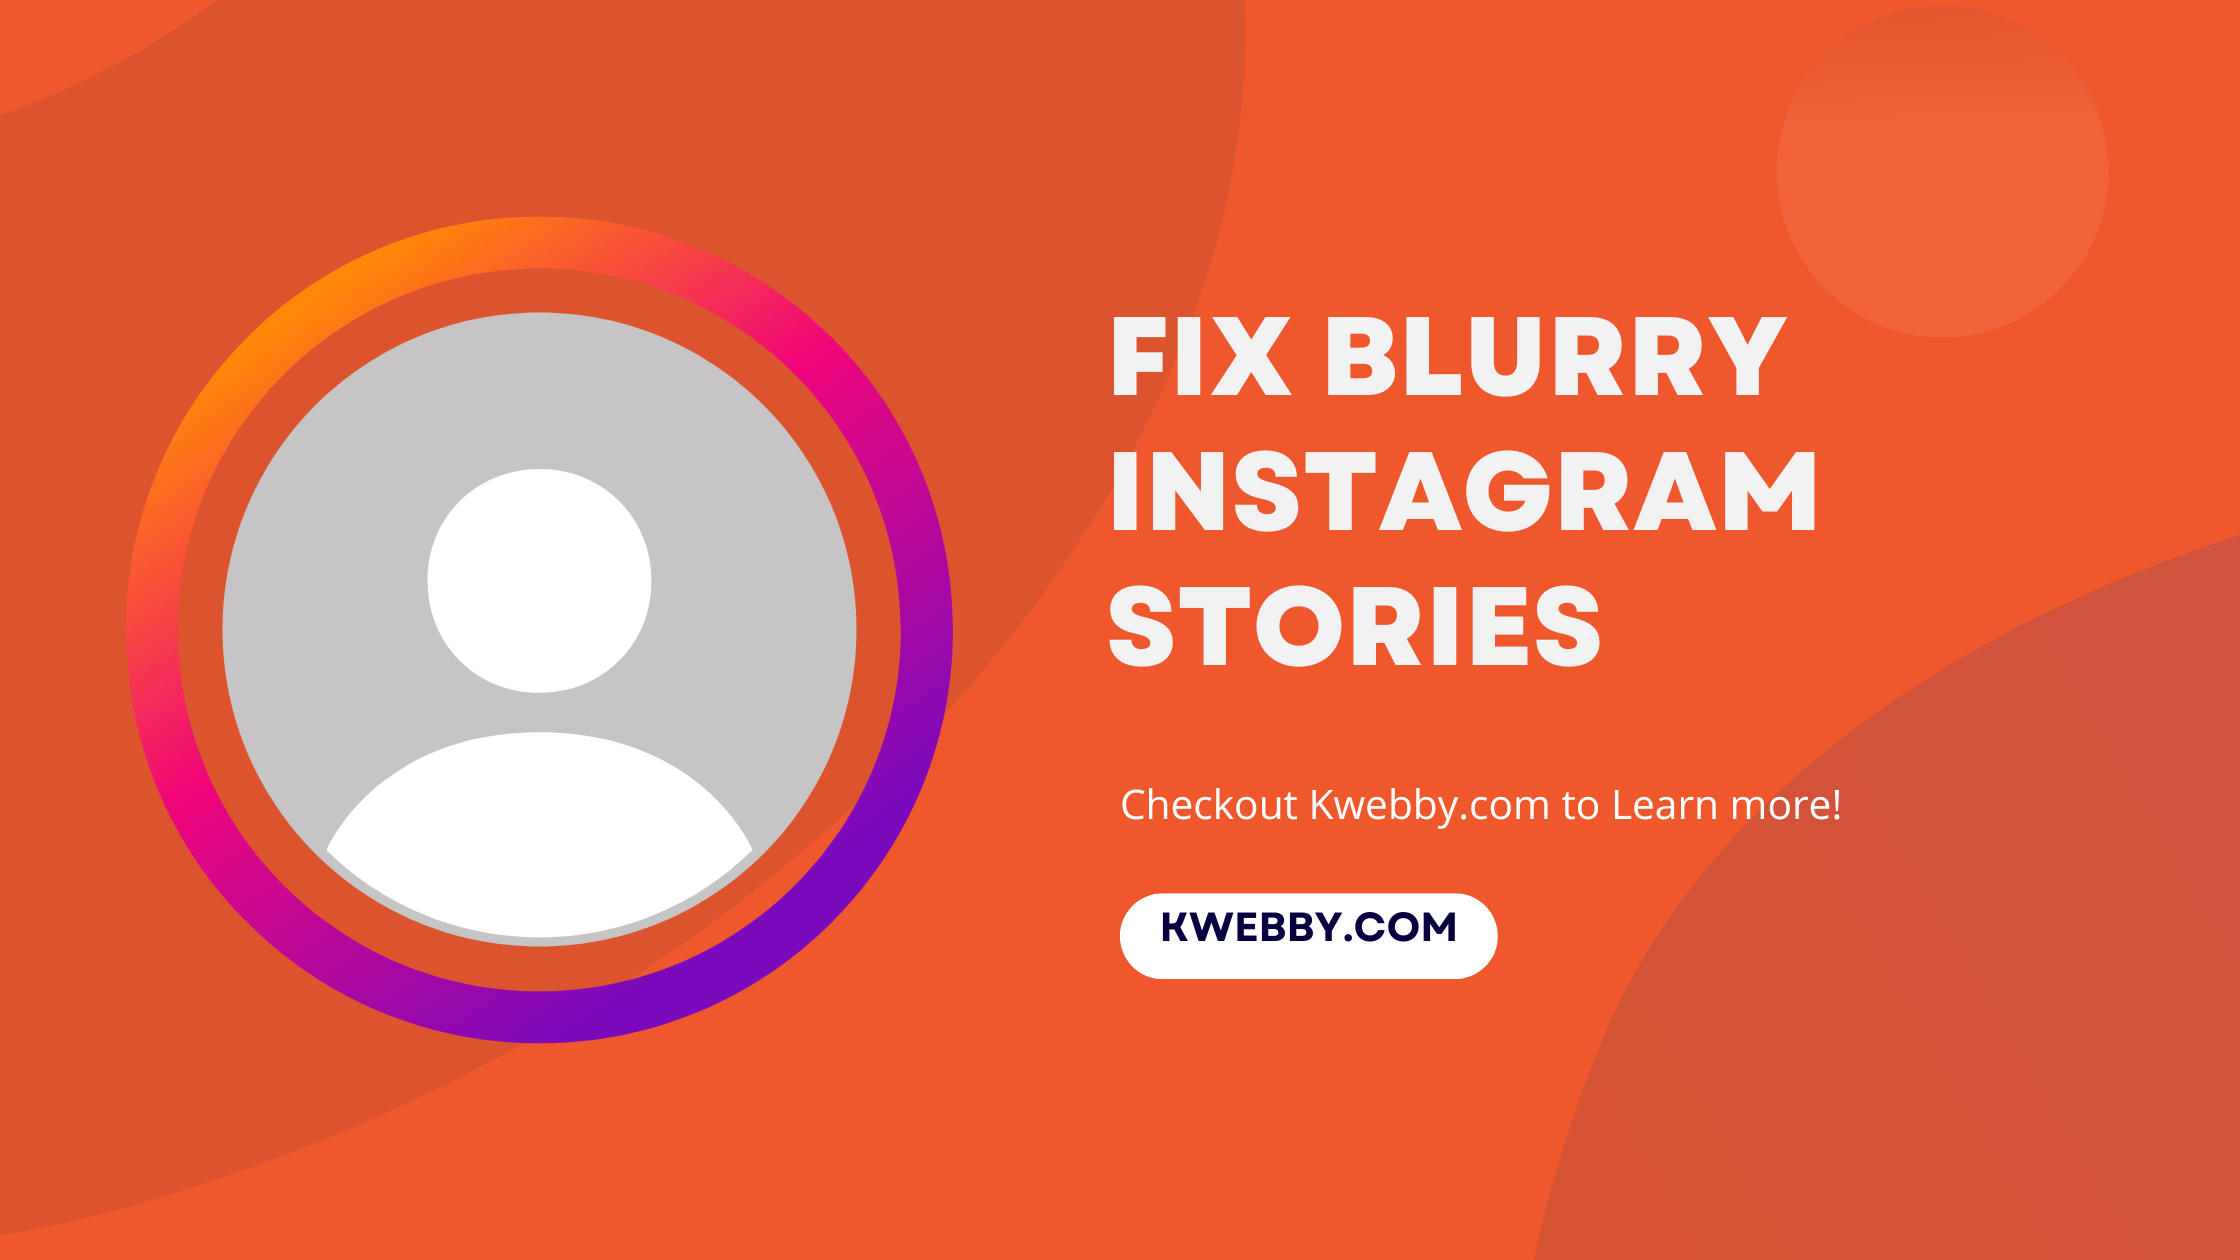 How to Fix Blurry Instagram Stories in 5 Easy Steps